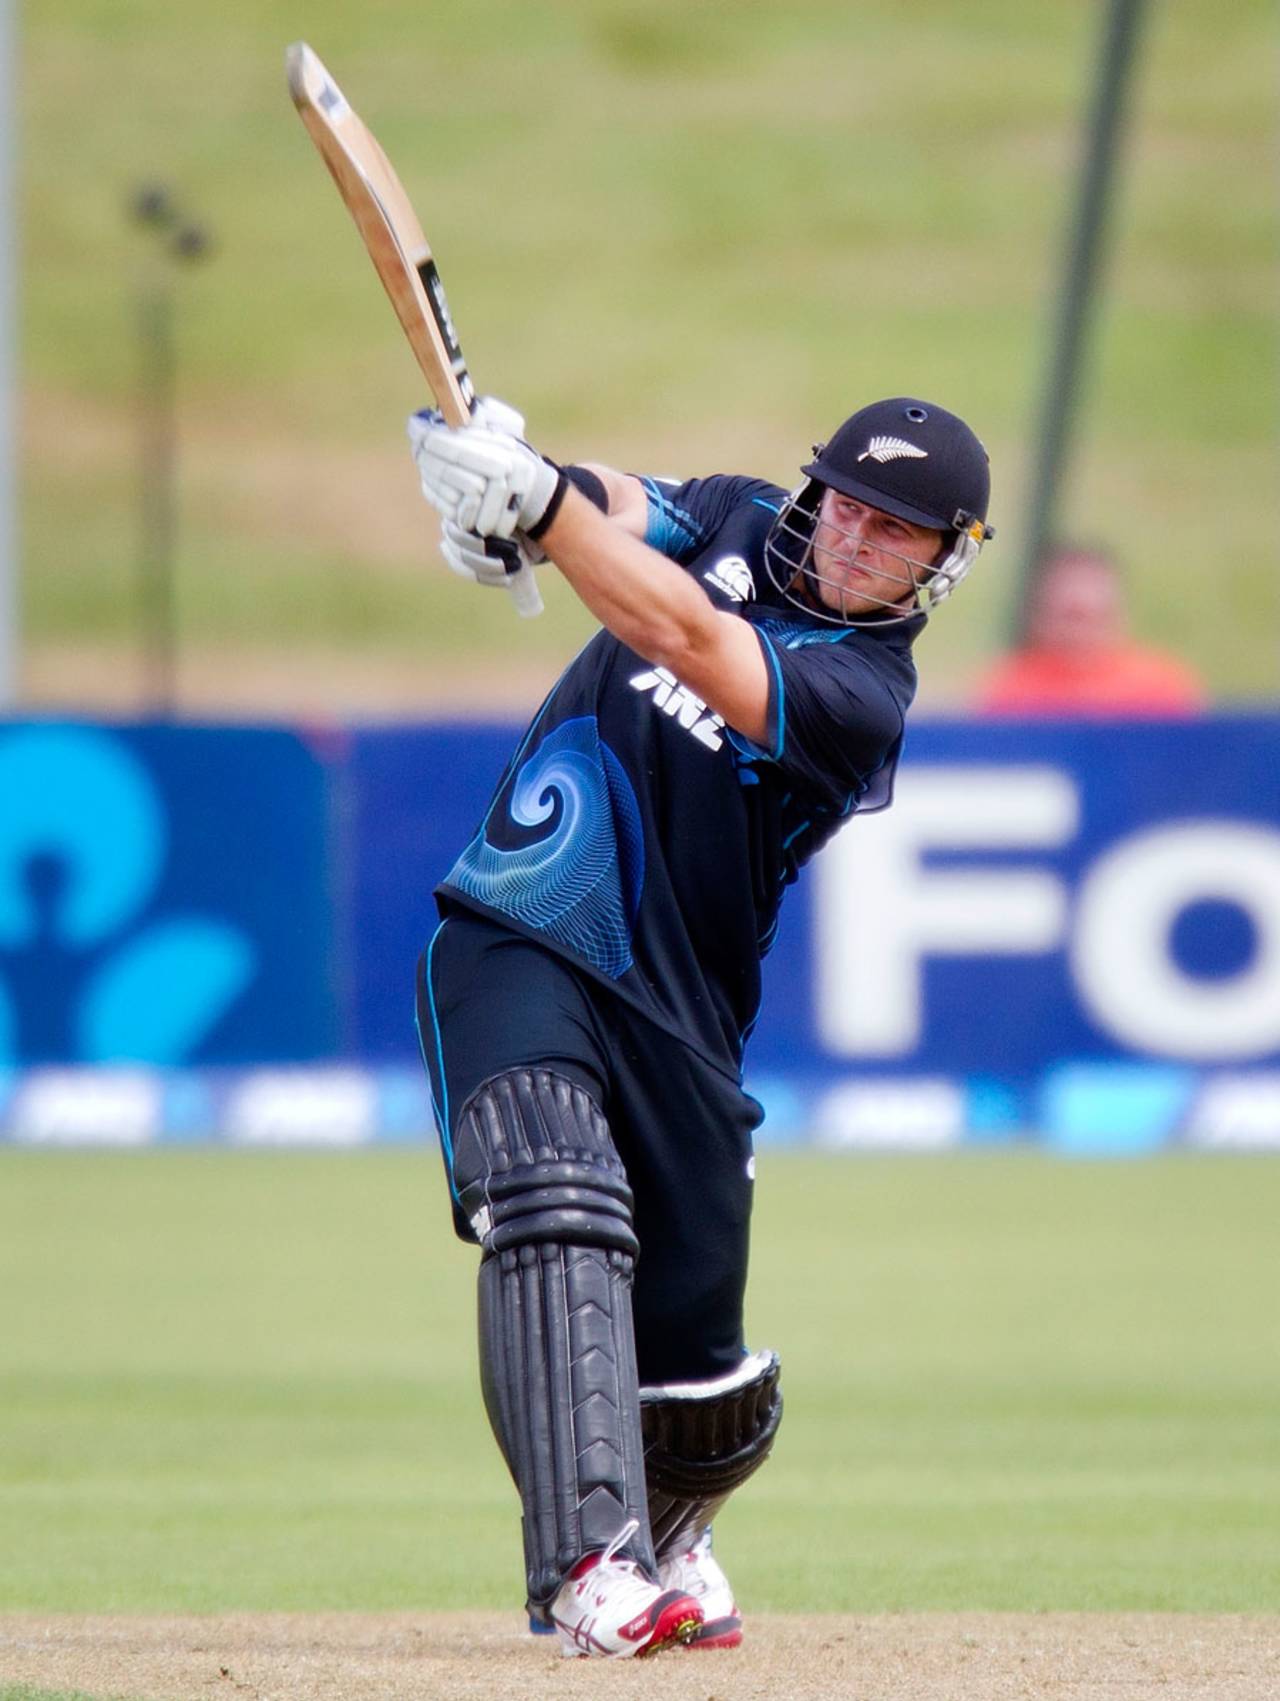 Corey Anderson smites the ball over the top, New Zealand v West Indies, 3rd ODI, Queenstown, January 1, 2014